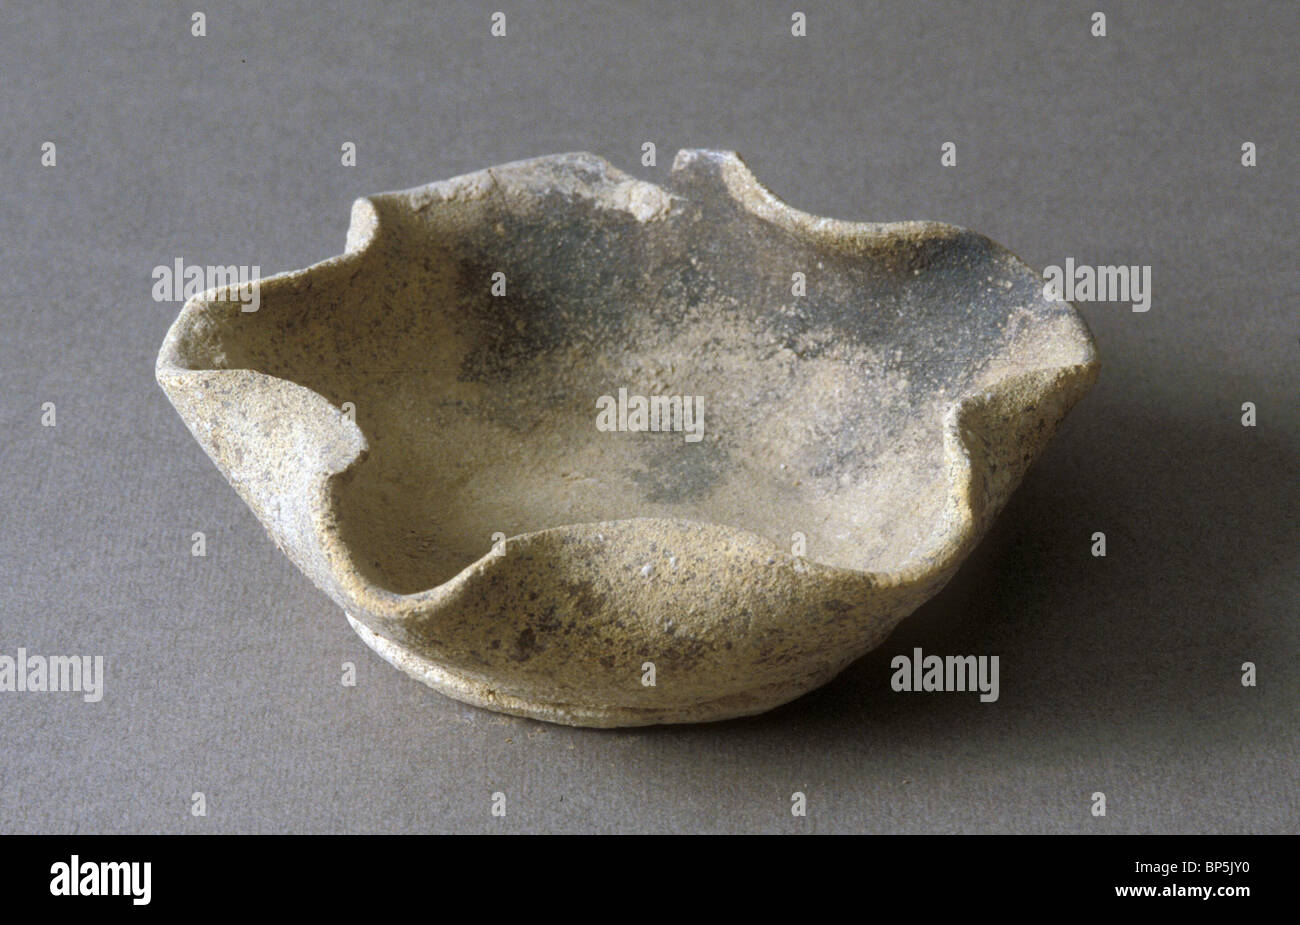 4347. EARLY CNAANITE (EARLY BRONZE AGE) C. 1800 BC OIL LAMPS Stock Photo